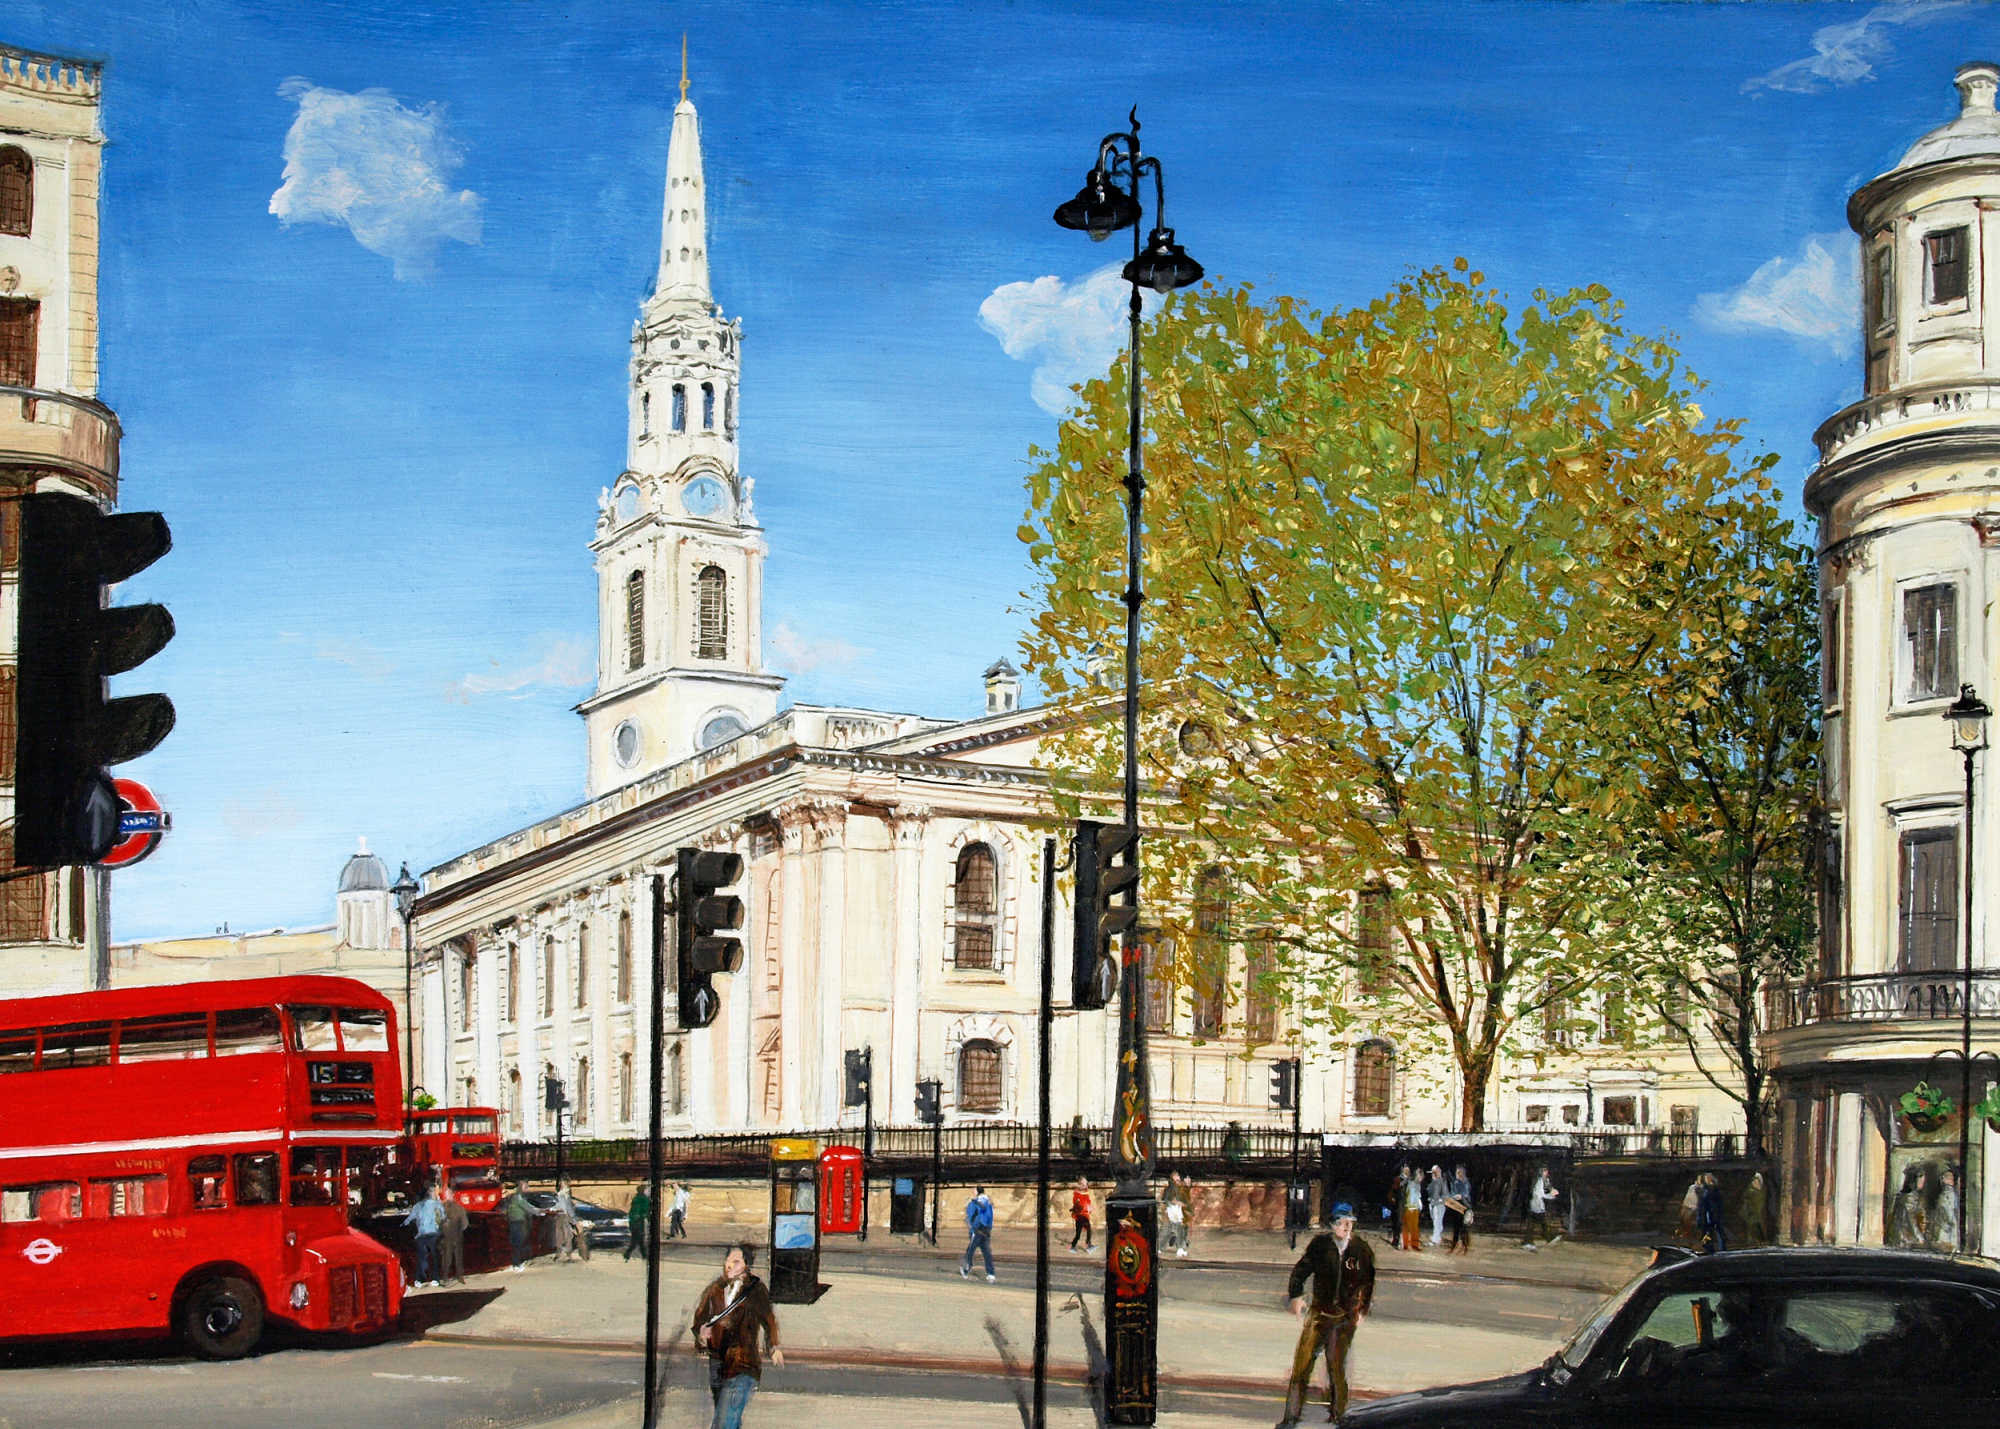 St Martin's Church, from the Strand, London (England)